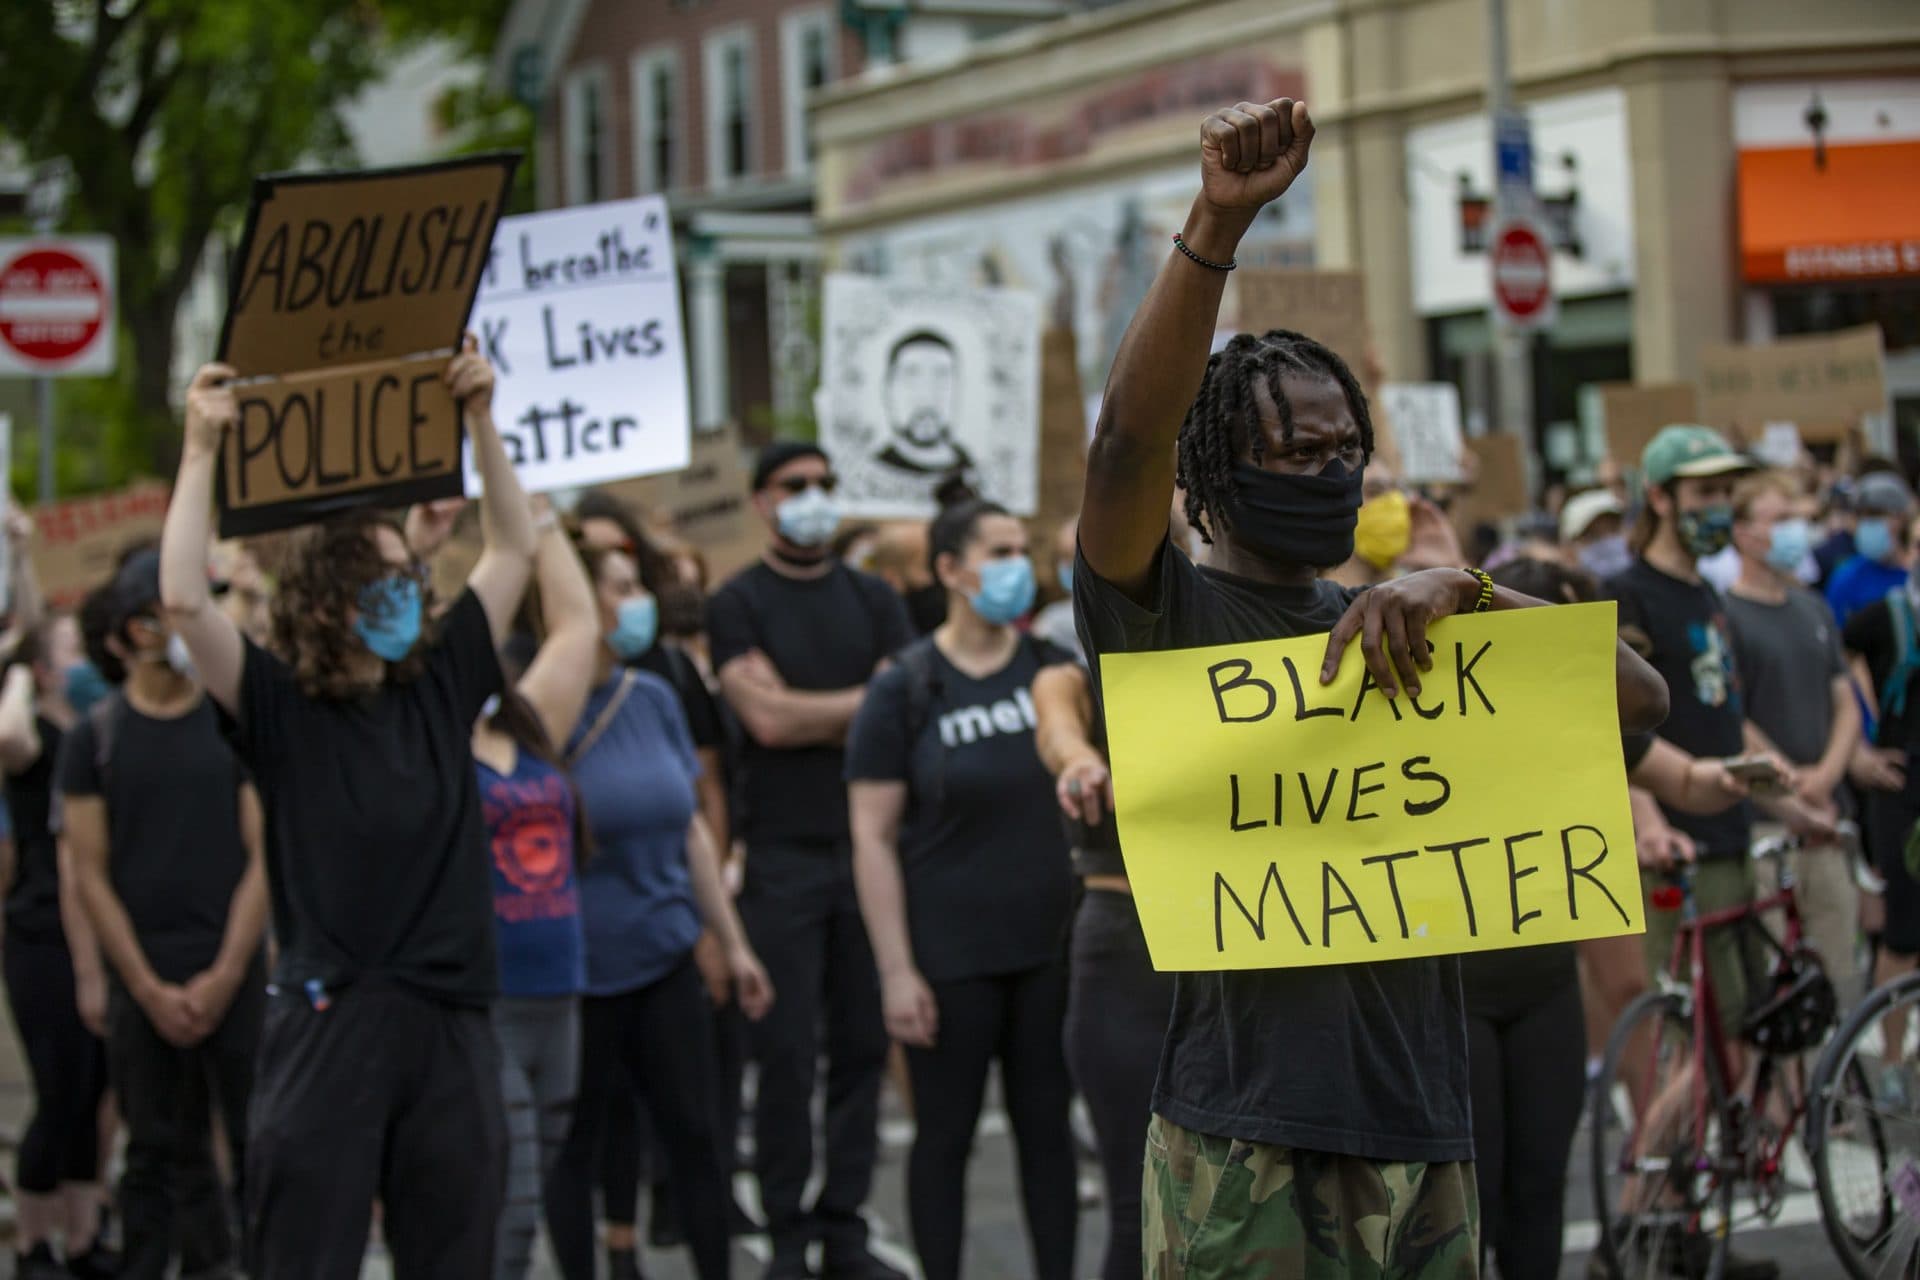 Junior Nash stands out from the crowd with his fist raised during a protest in Jamaica Plain. (Jesse Costa/WBUR)